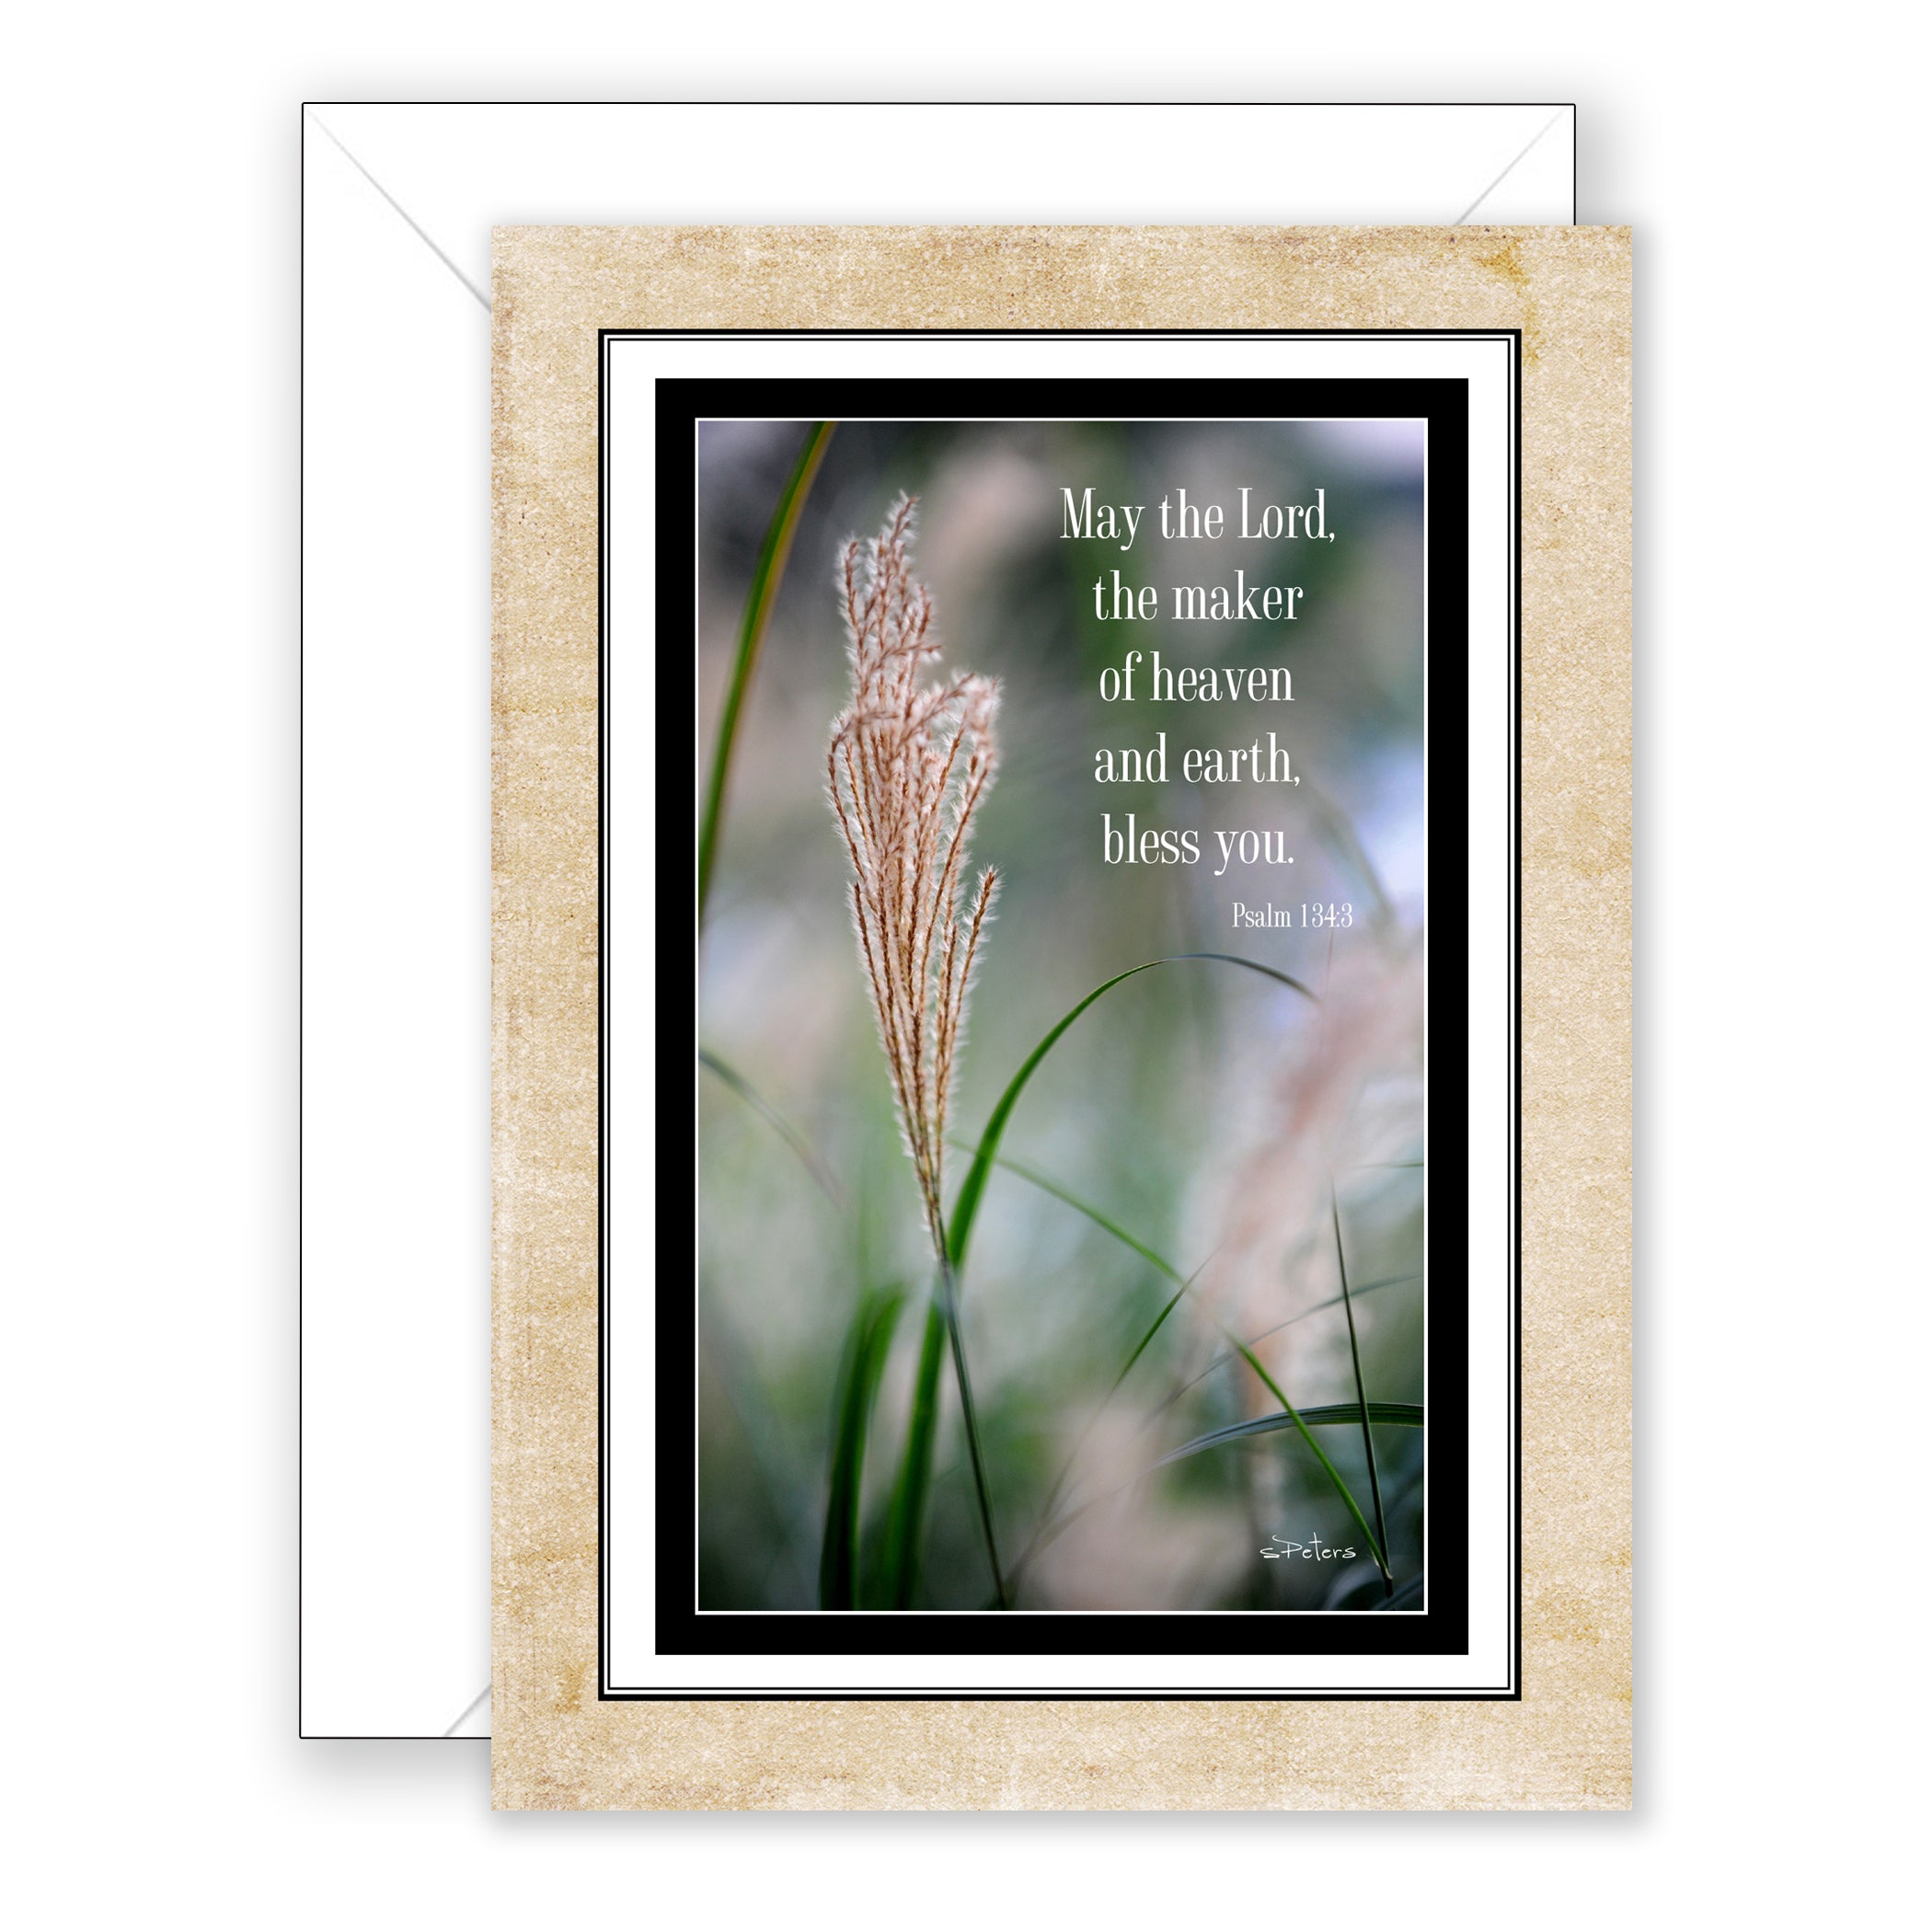 Earthly Blessing (Psalm 134:3) - Thinking of You Card